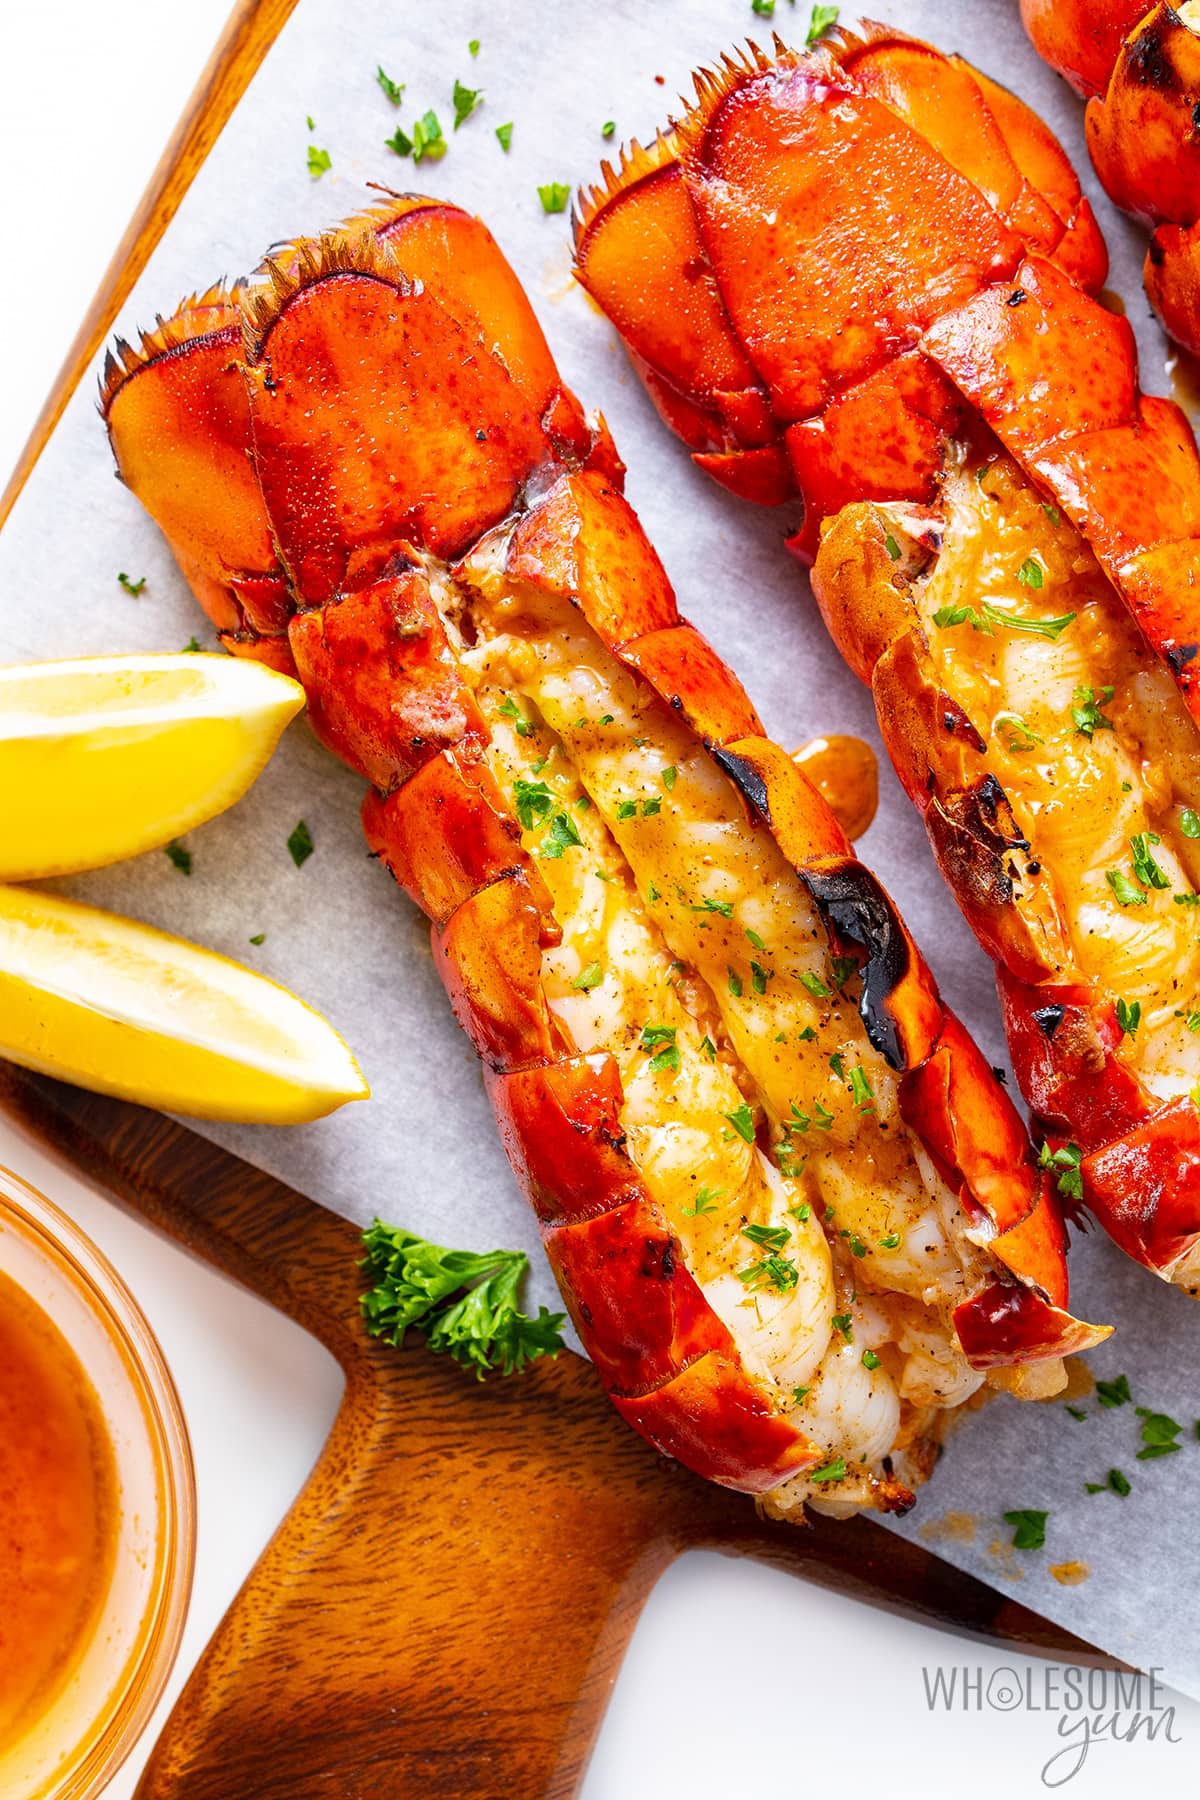 Grilled lobster tails on a cutting board with lemon wedges, fresh parsley, and garlic butter on the side.